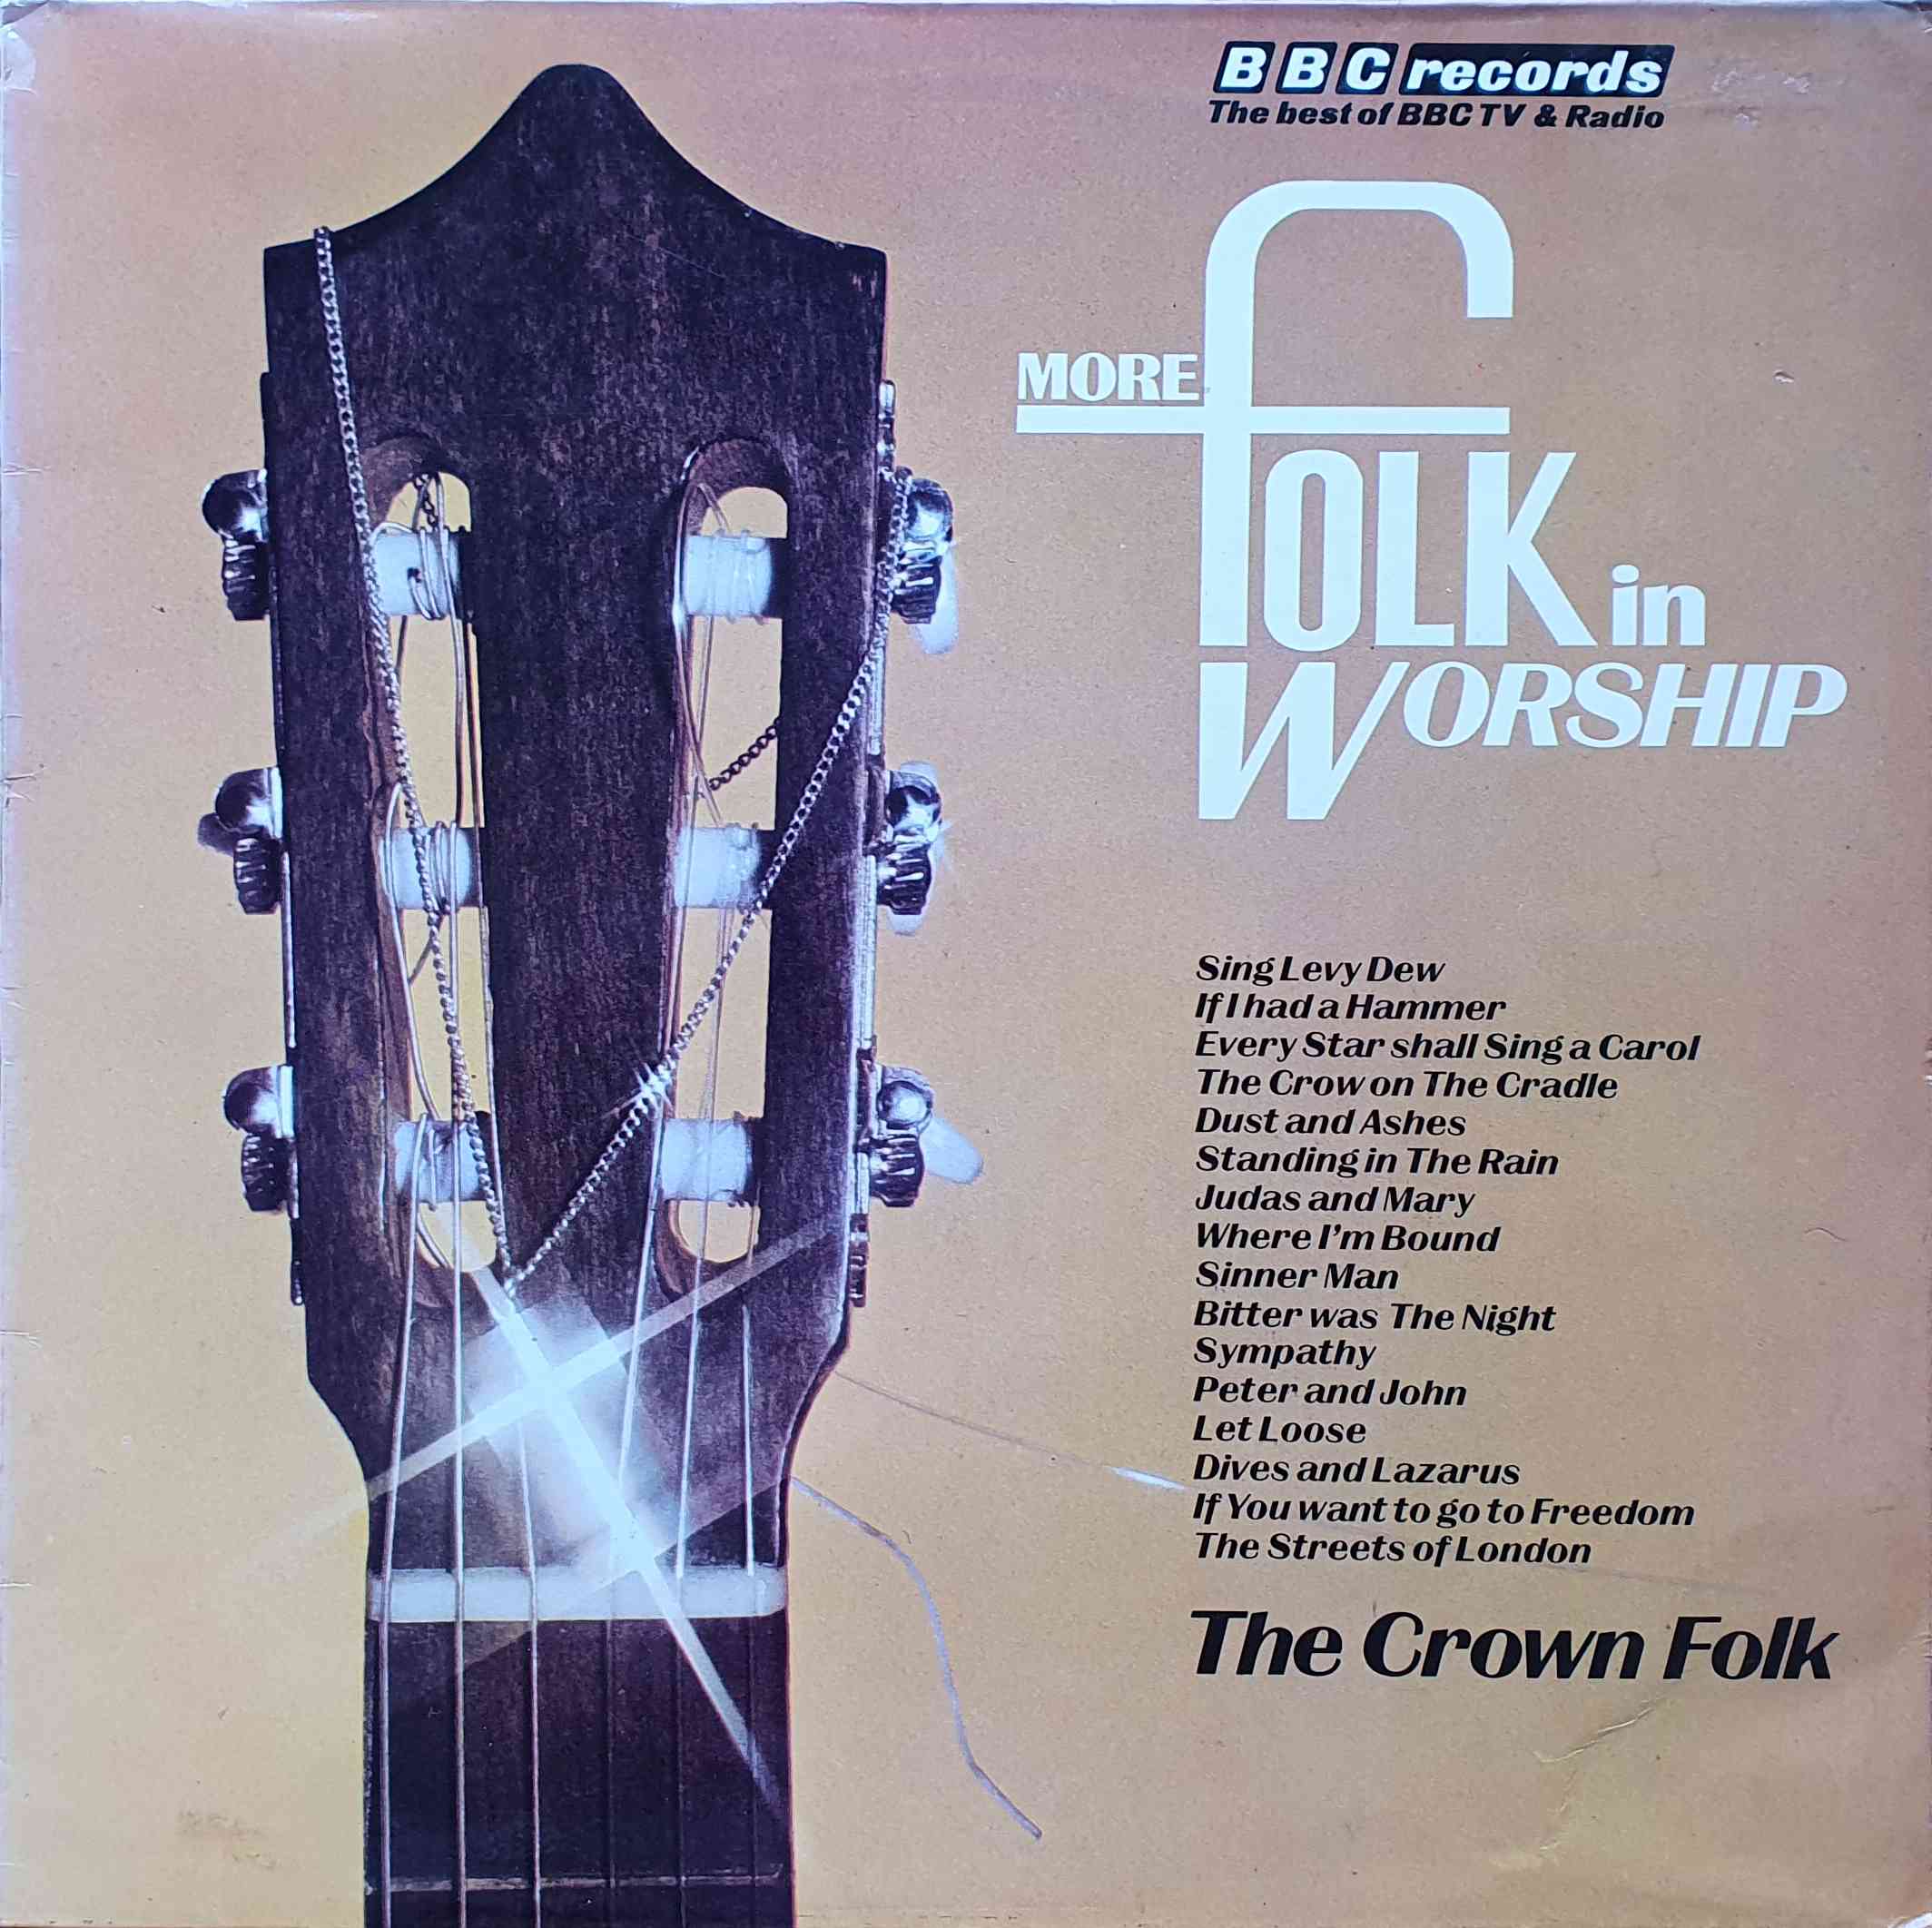 Picture of REC 176 More folk in Worship by artist Various from the BBC albums - Records and Tapes library